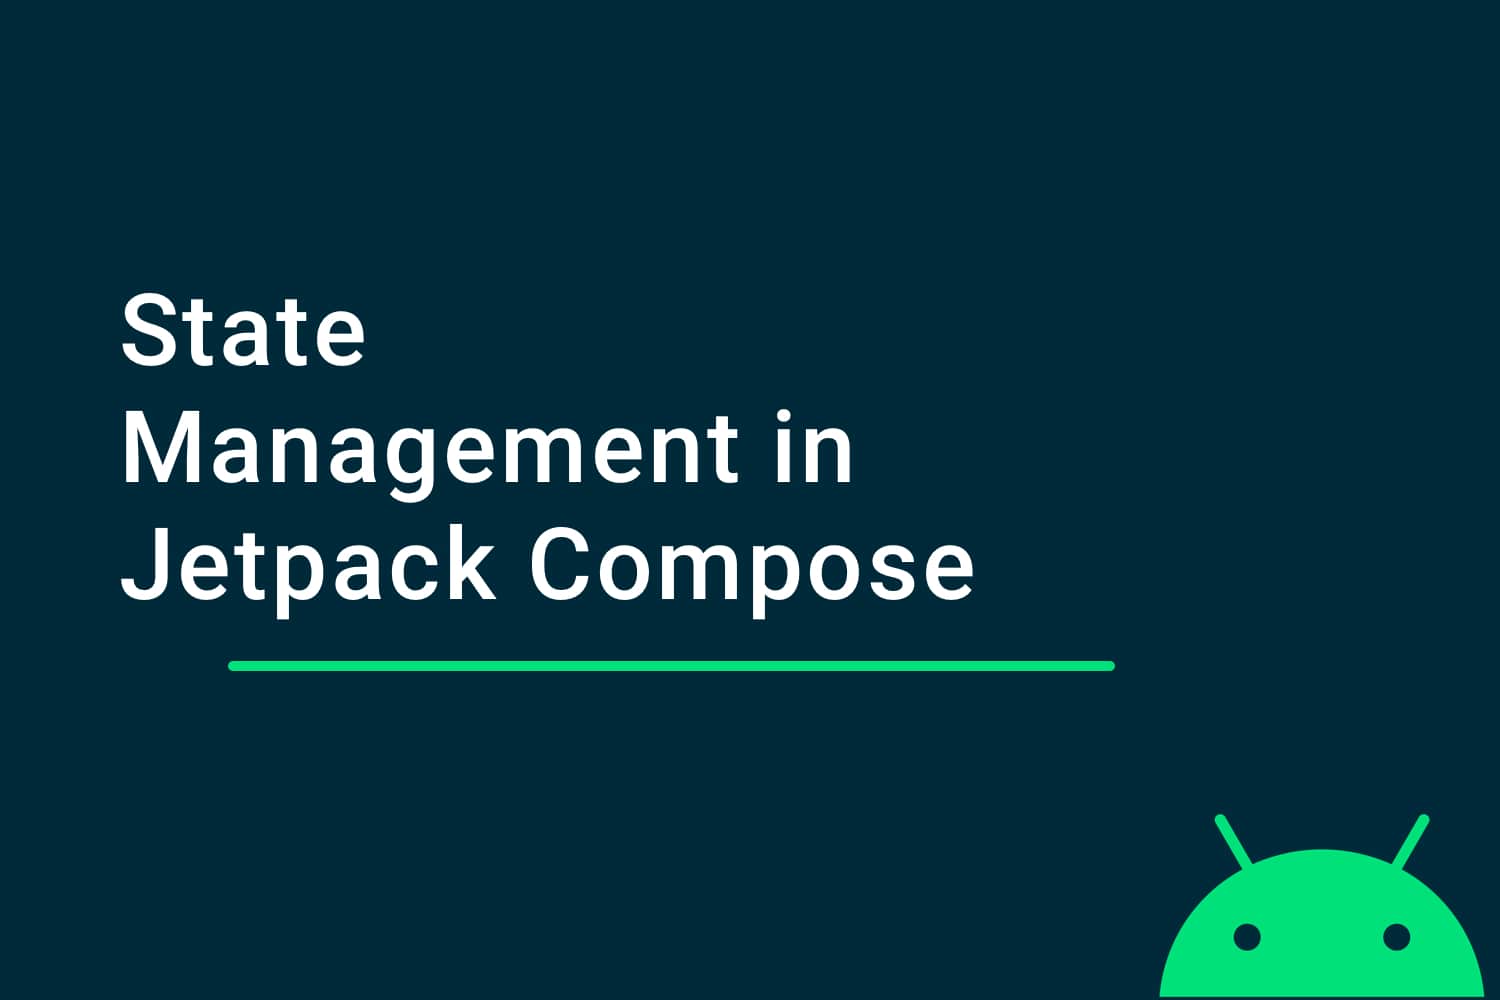 State Management in Jetpack Compose